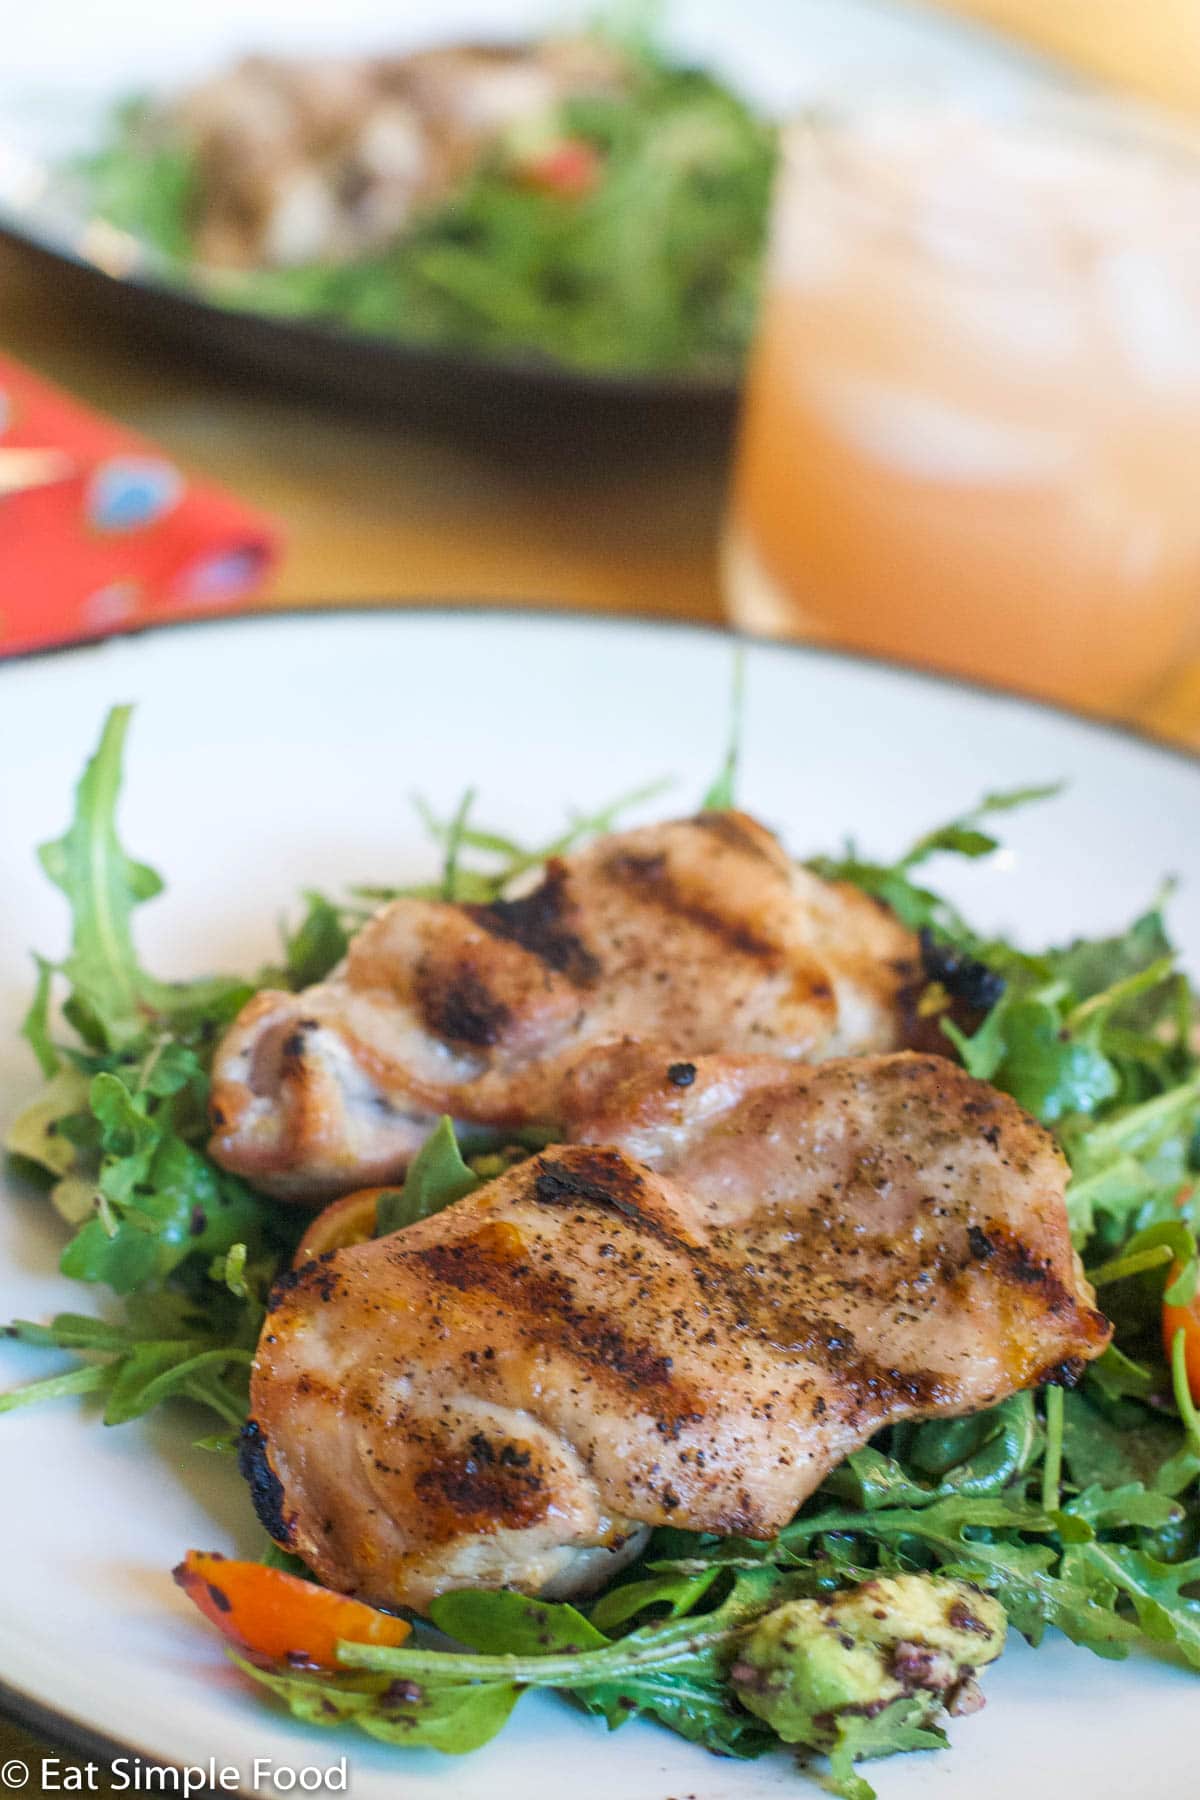 2 grilled chicken thighs over a bed of arugula salad w/ halved cherry tomatoes and diced avocado. On a white plate. Another plate in background with same thing.